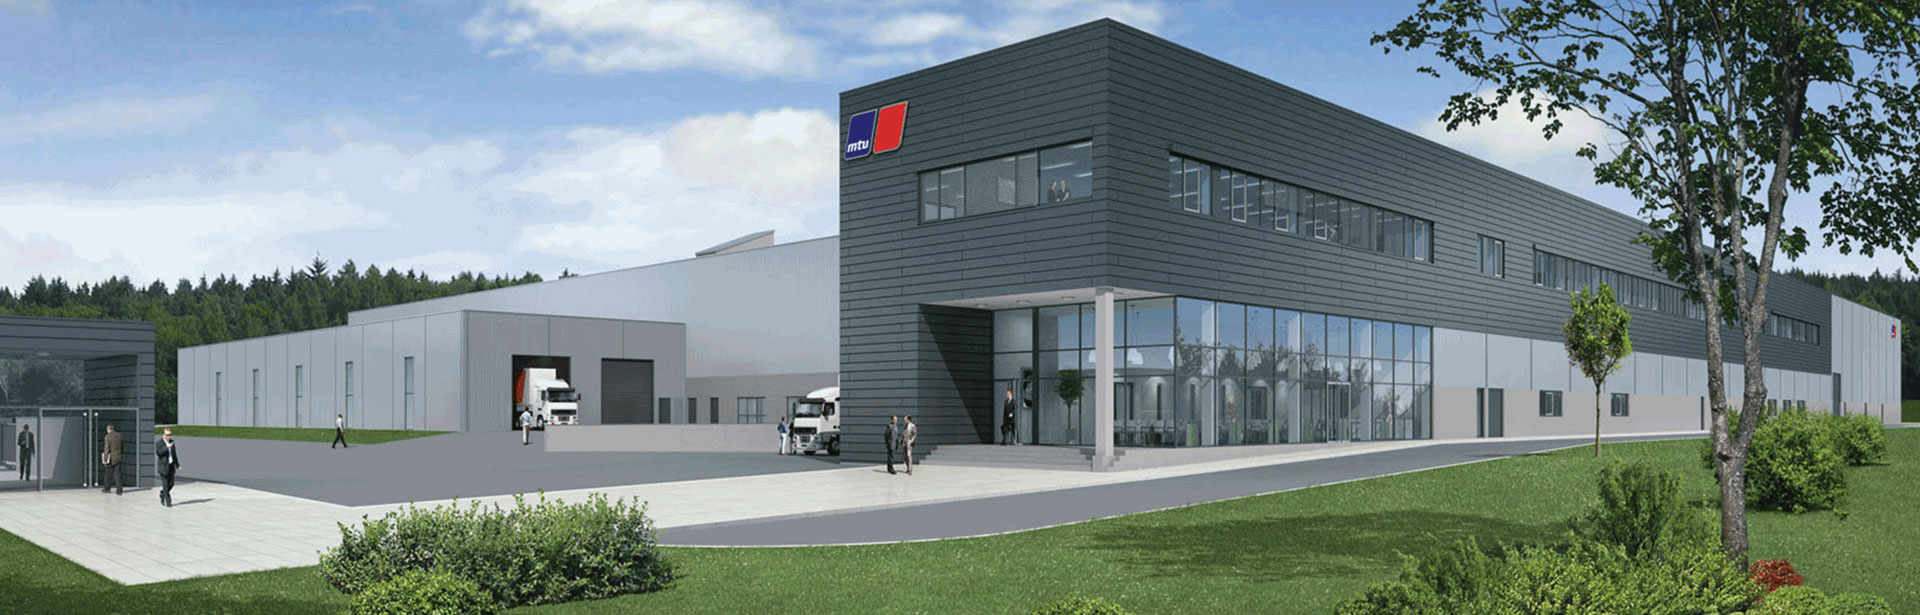 Animation of the new logistics center for Rolls Royce spare parts